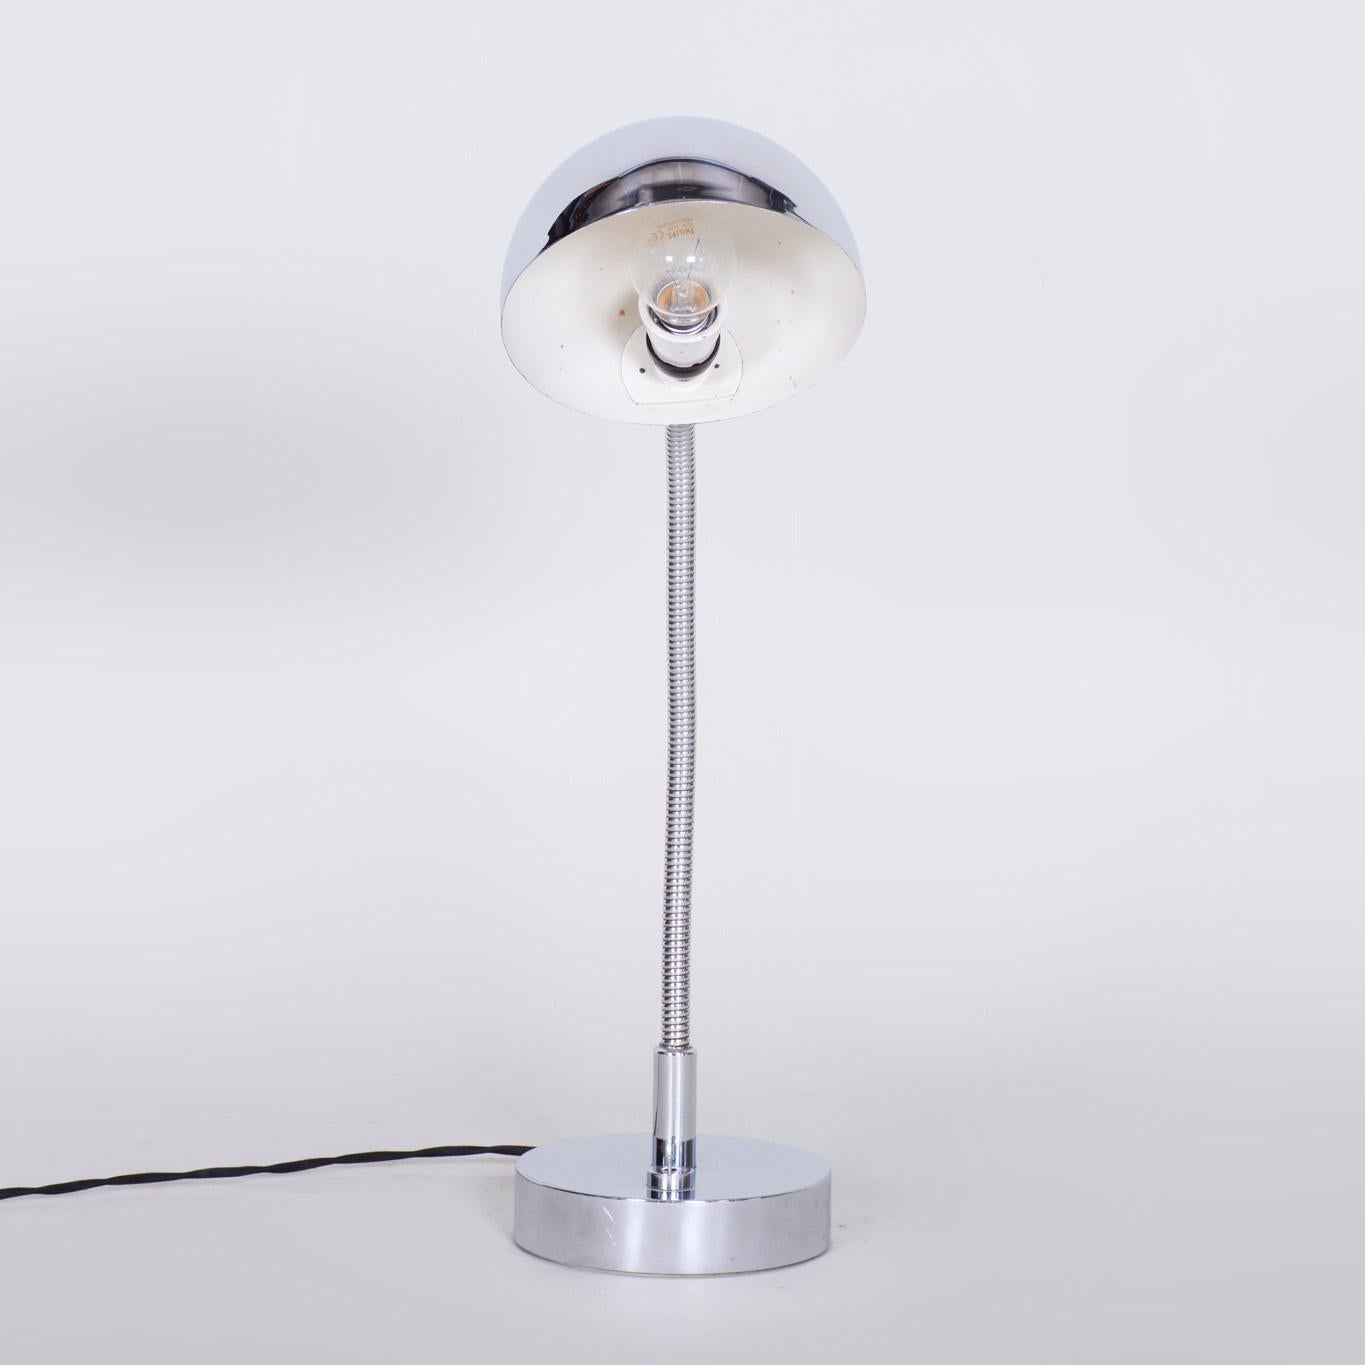 Chrome Bauhaus Table Lamp, Newly Electrified, Designer M. Prokop, Czechia, 1920s In Good Condition For Sale In Horomerice, CZ